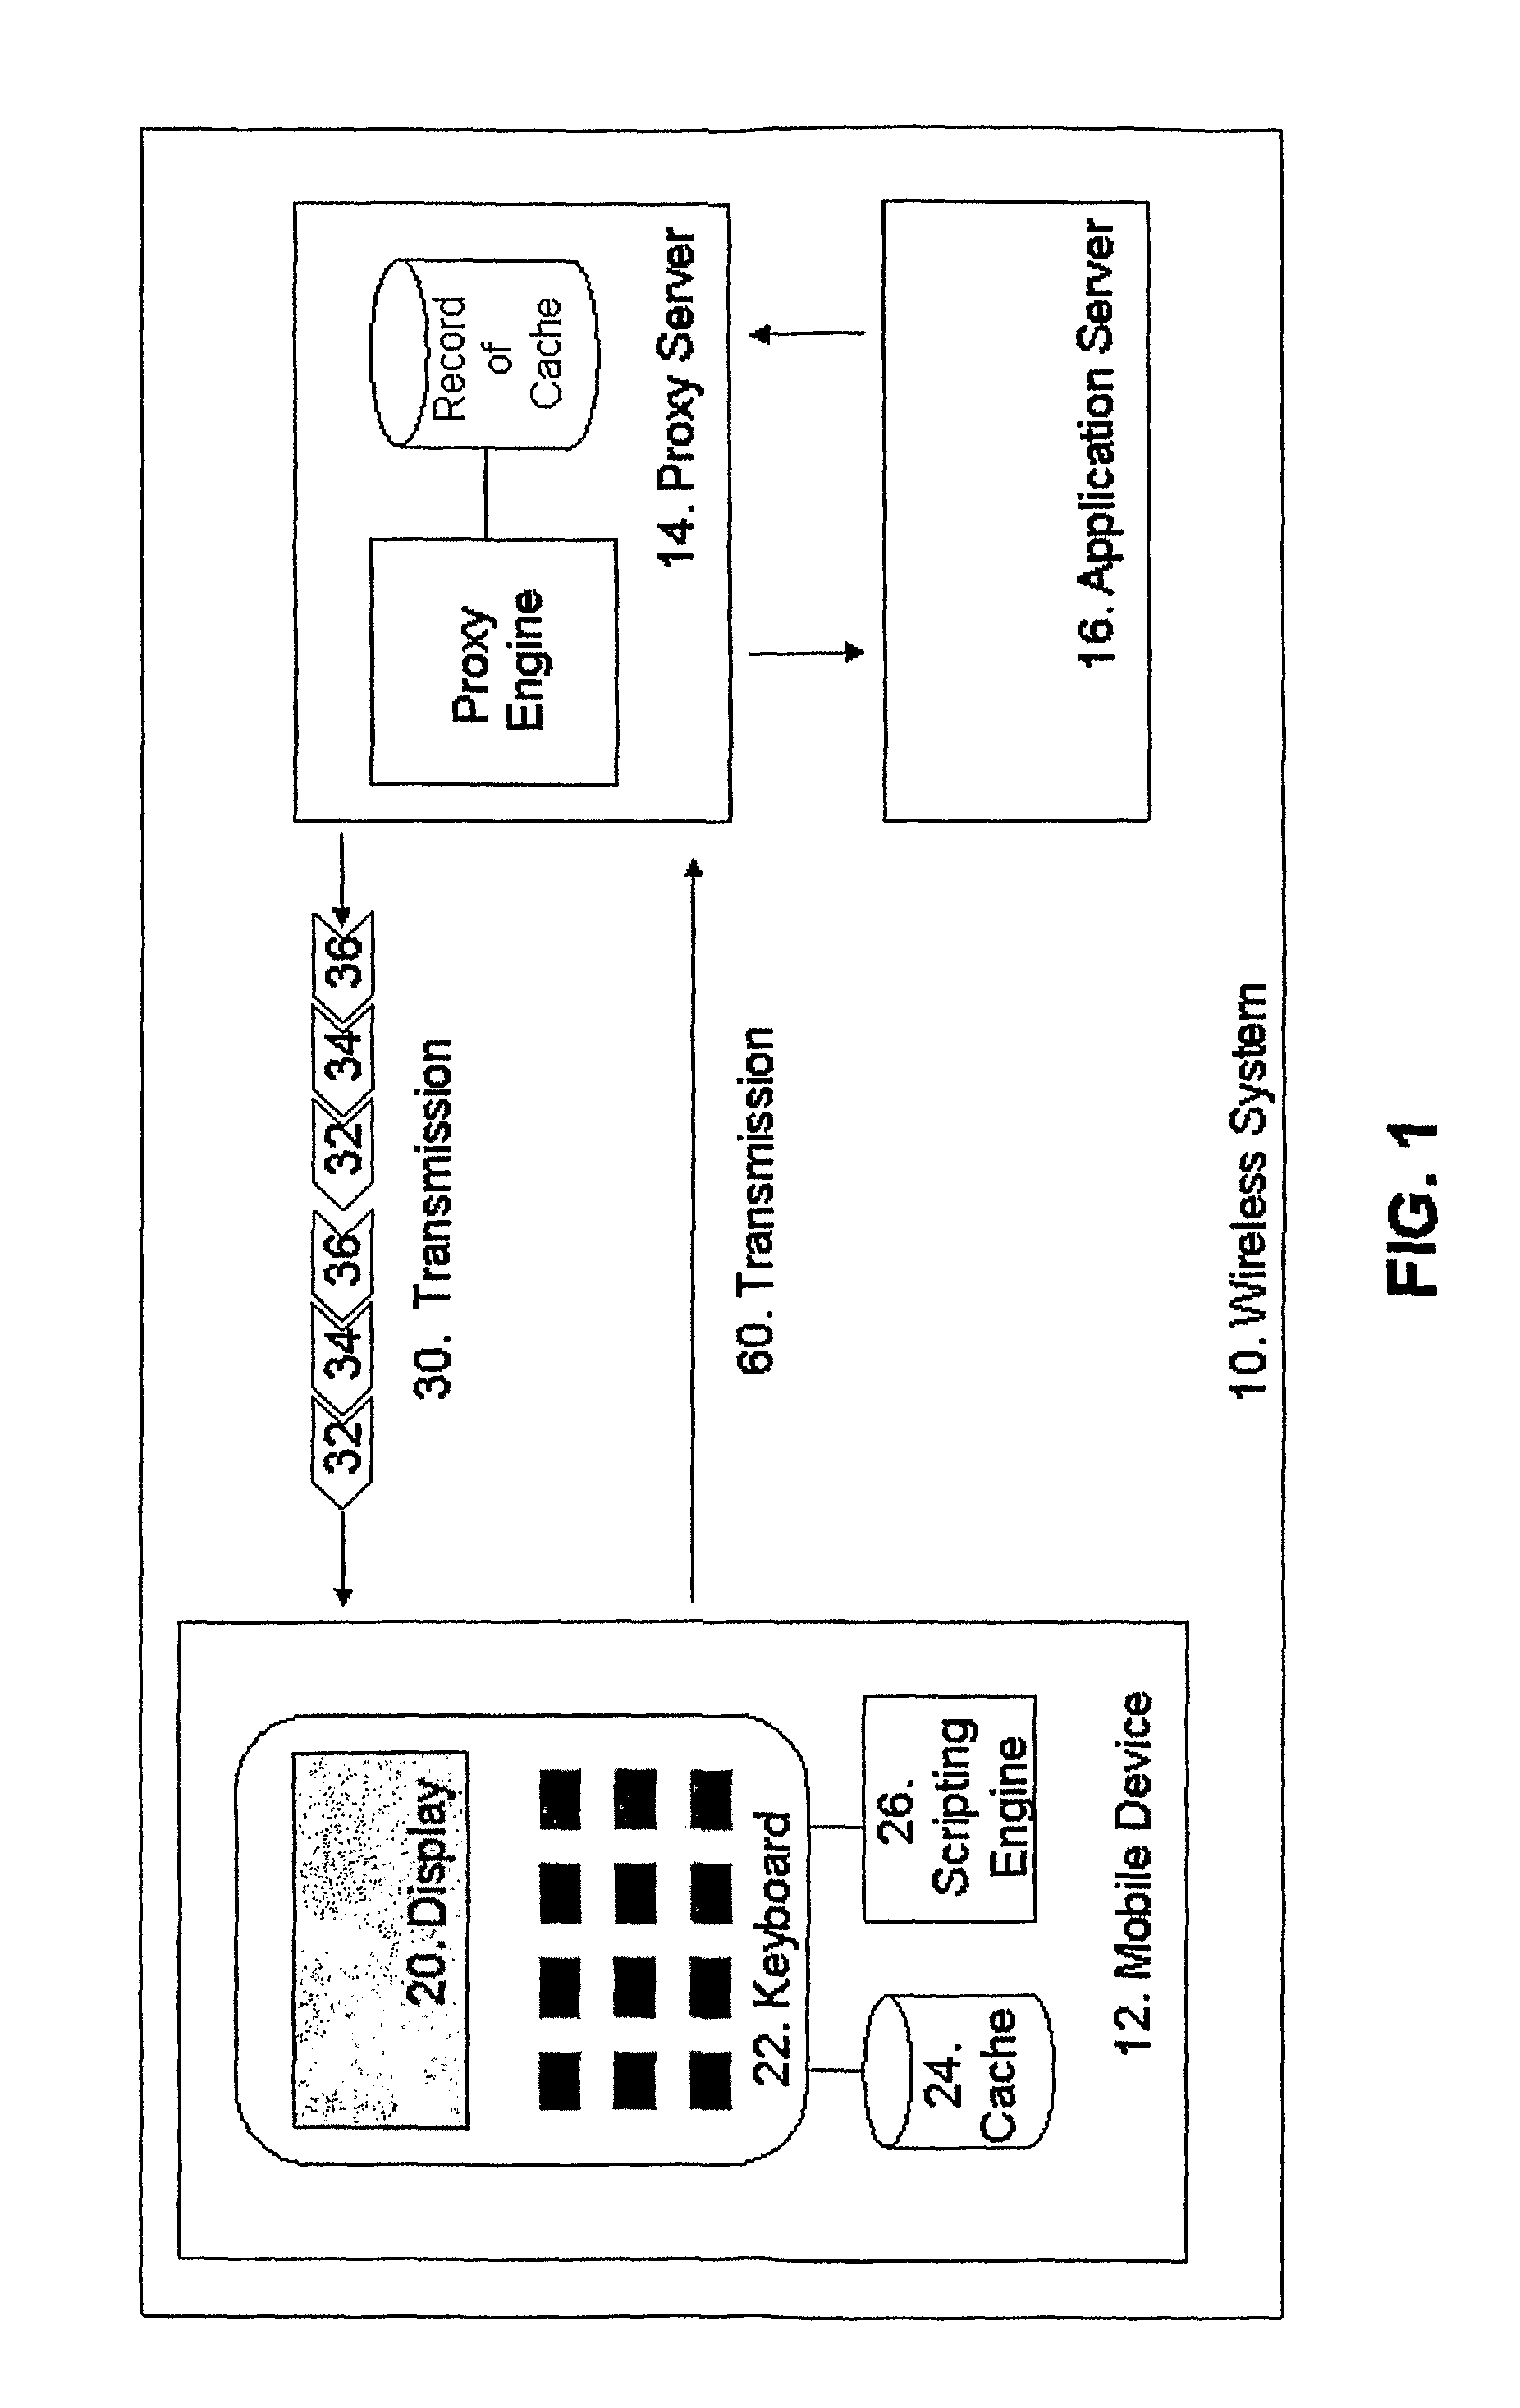 Systems, methods, and computer readable media for providing applications style functionality to a user